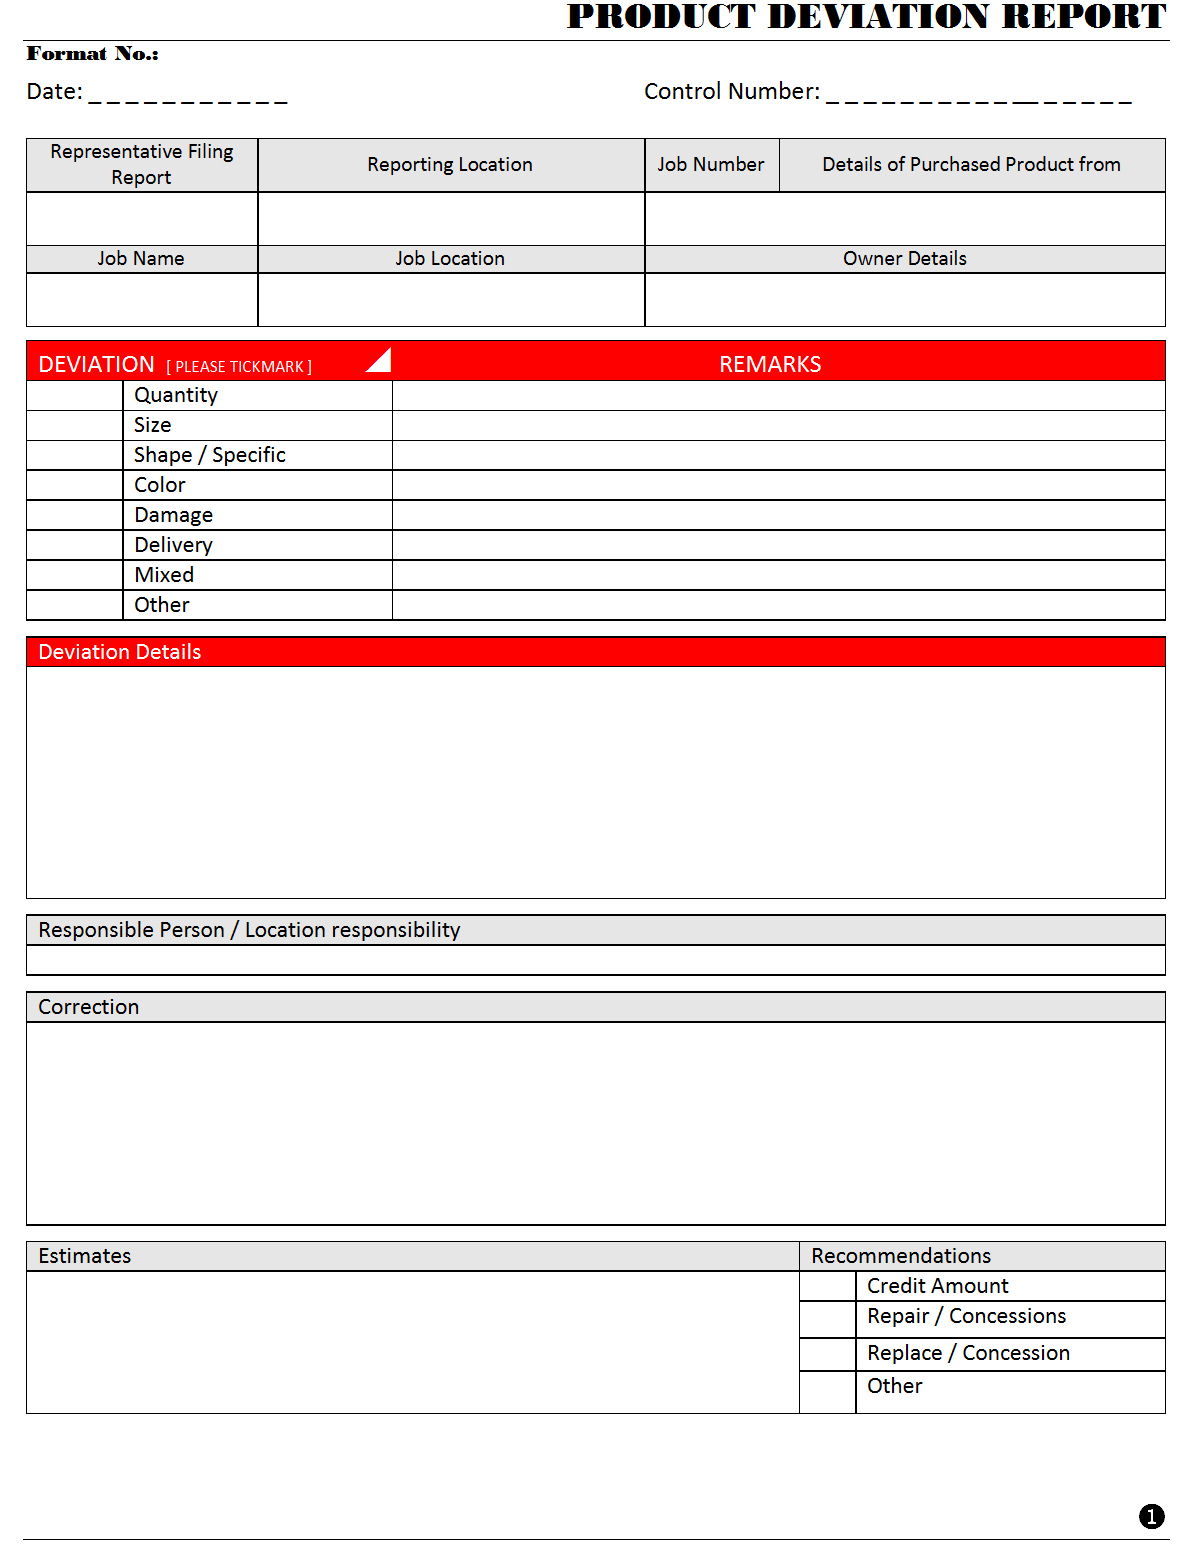 Product Deviation Report - With Deviation Report Template